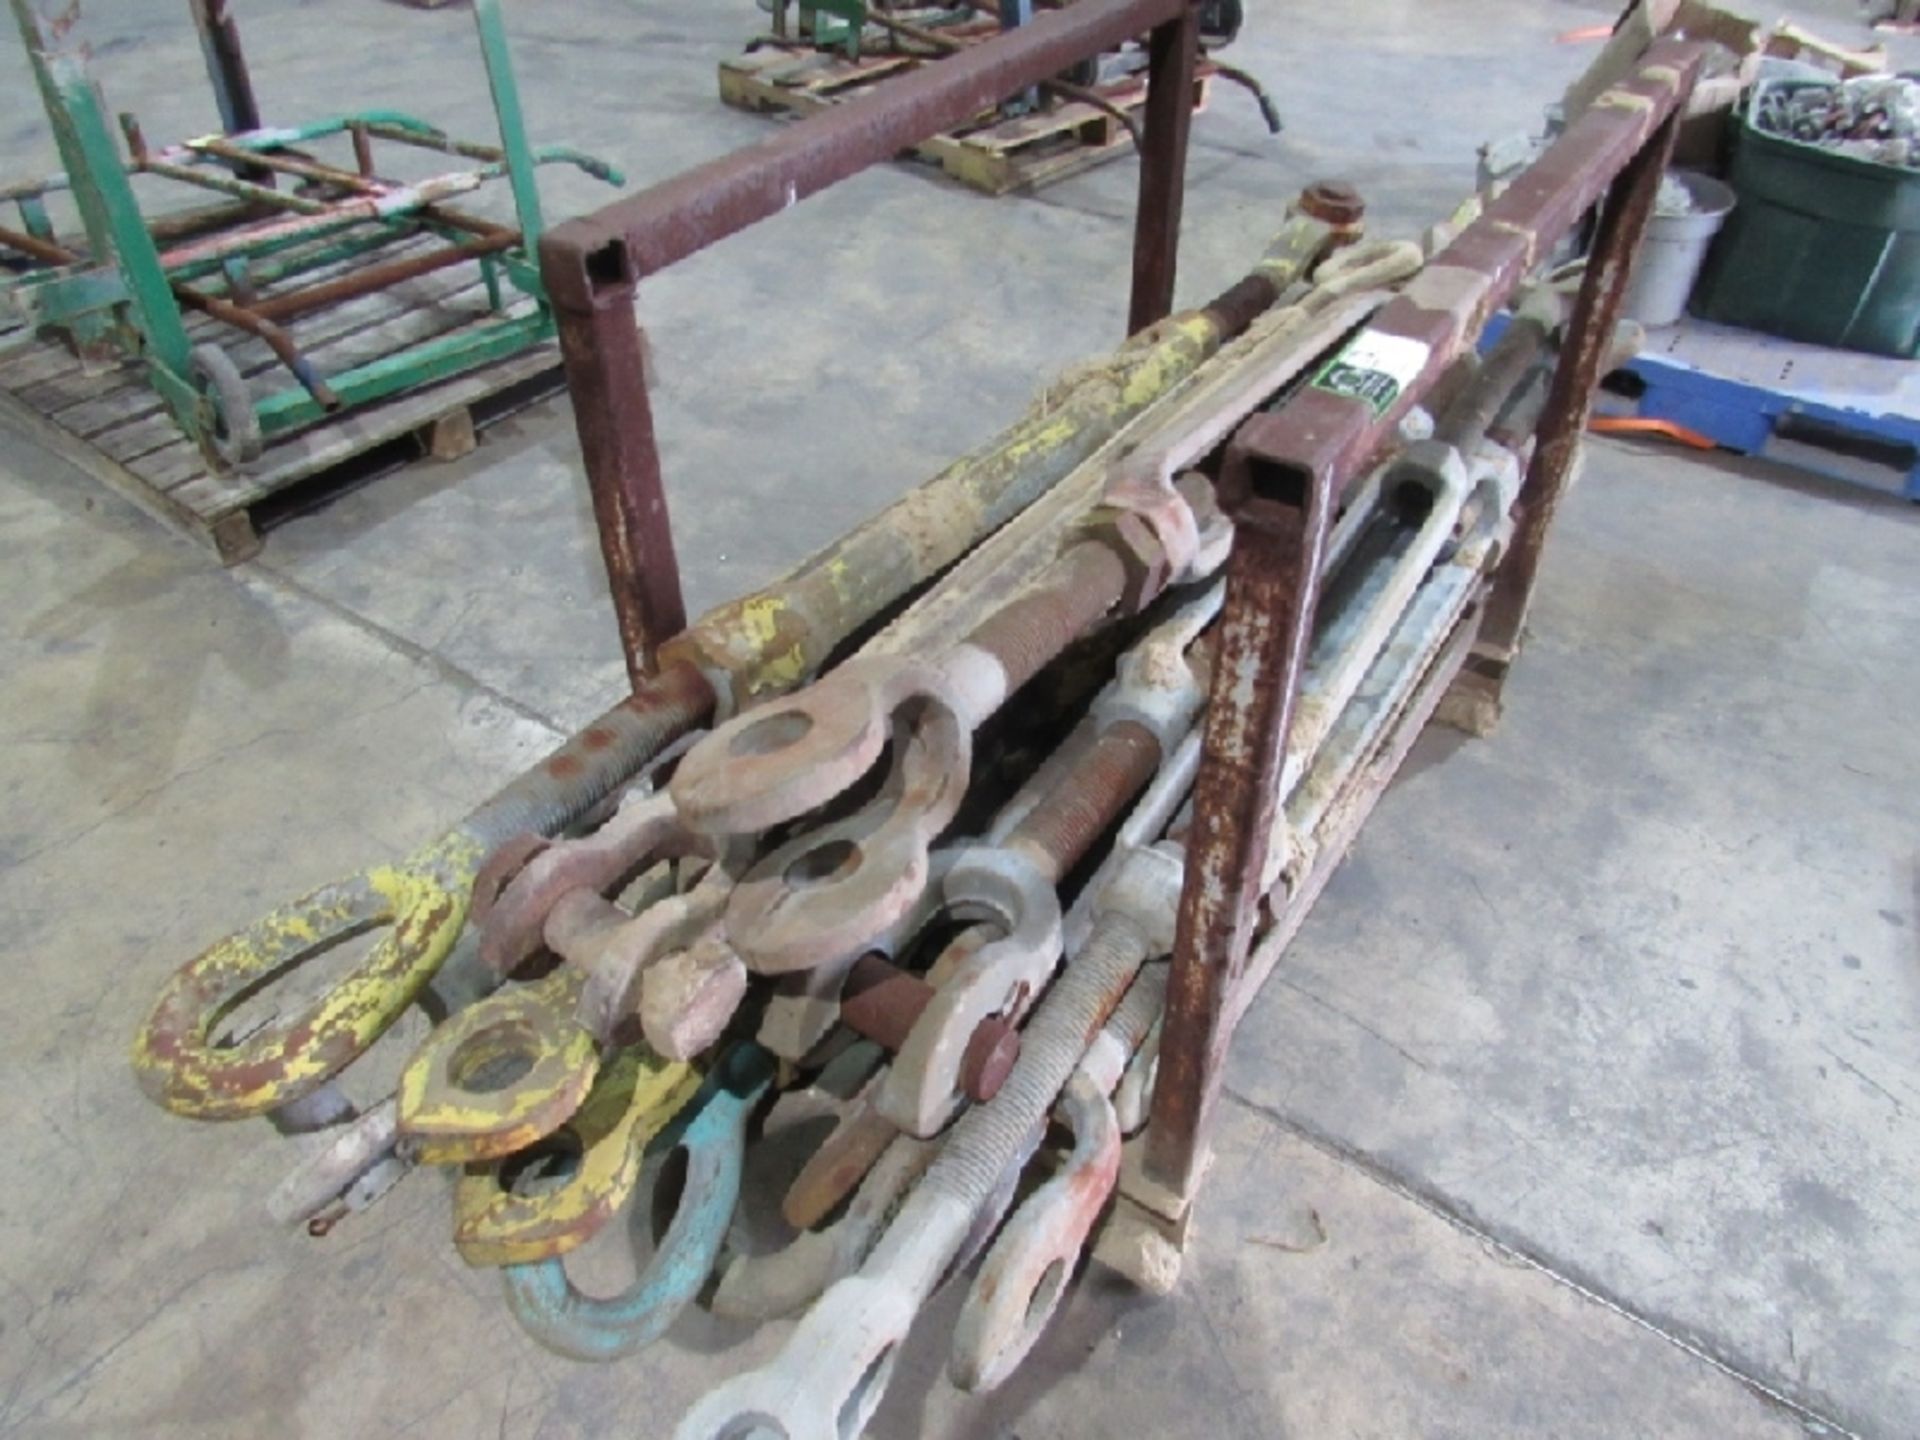 (approx qty - 20) Turnbuckles and Rack- ***Located in Chattanooga, TN*** MFR - Unknown Sizes Range - Bild 2 aus 8